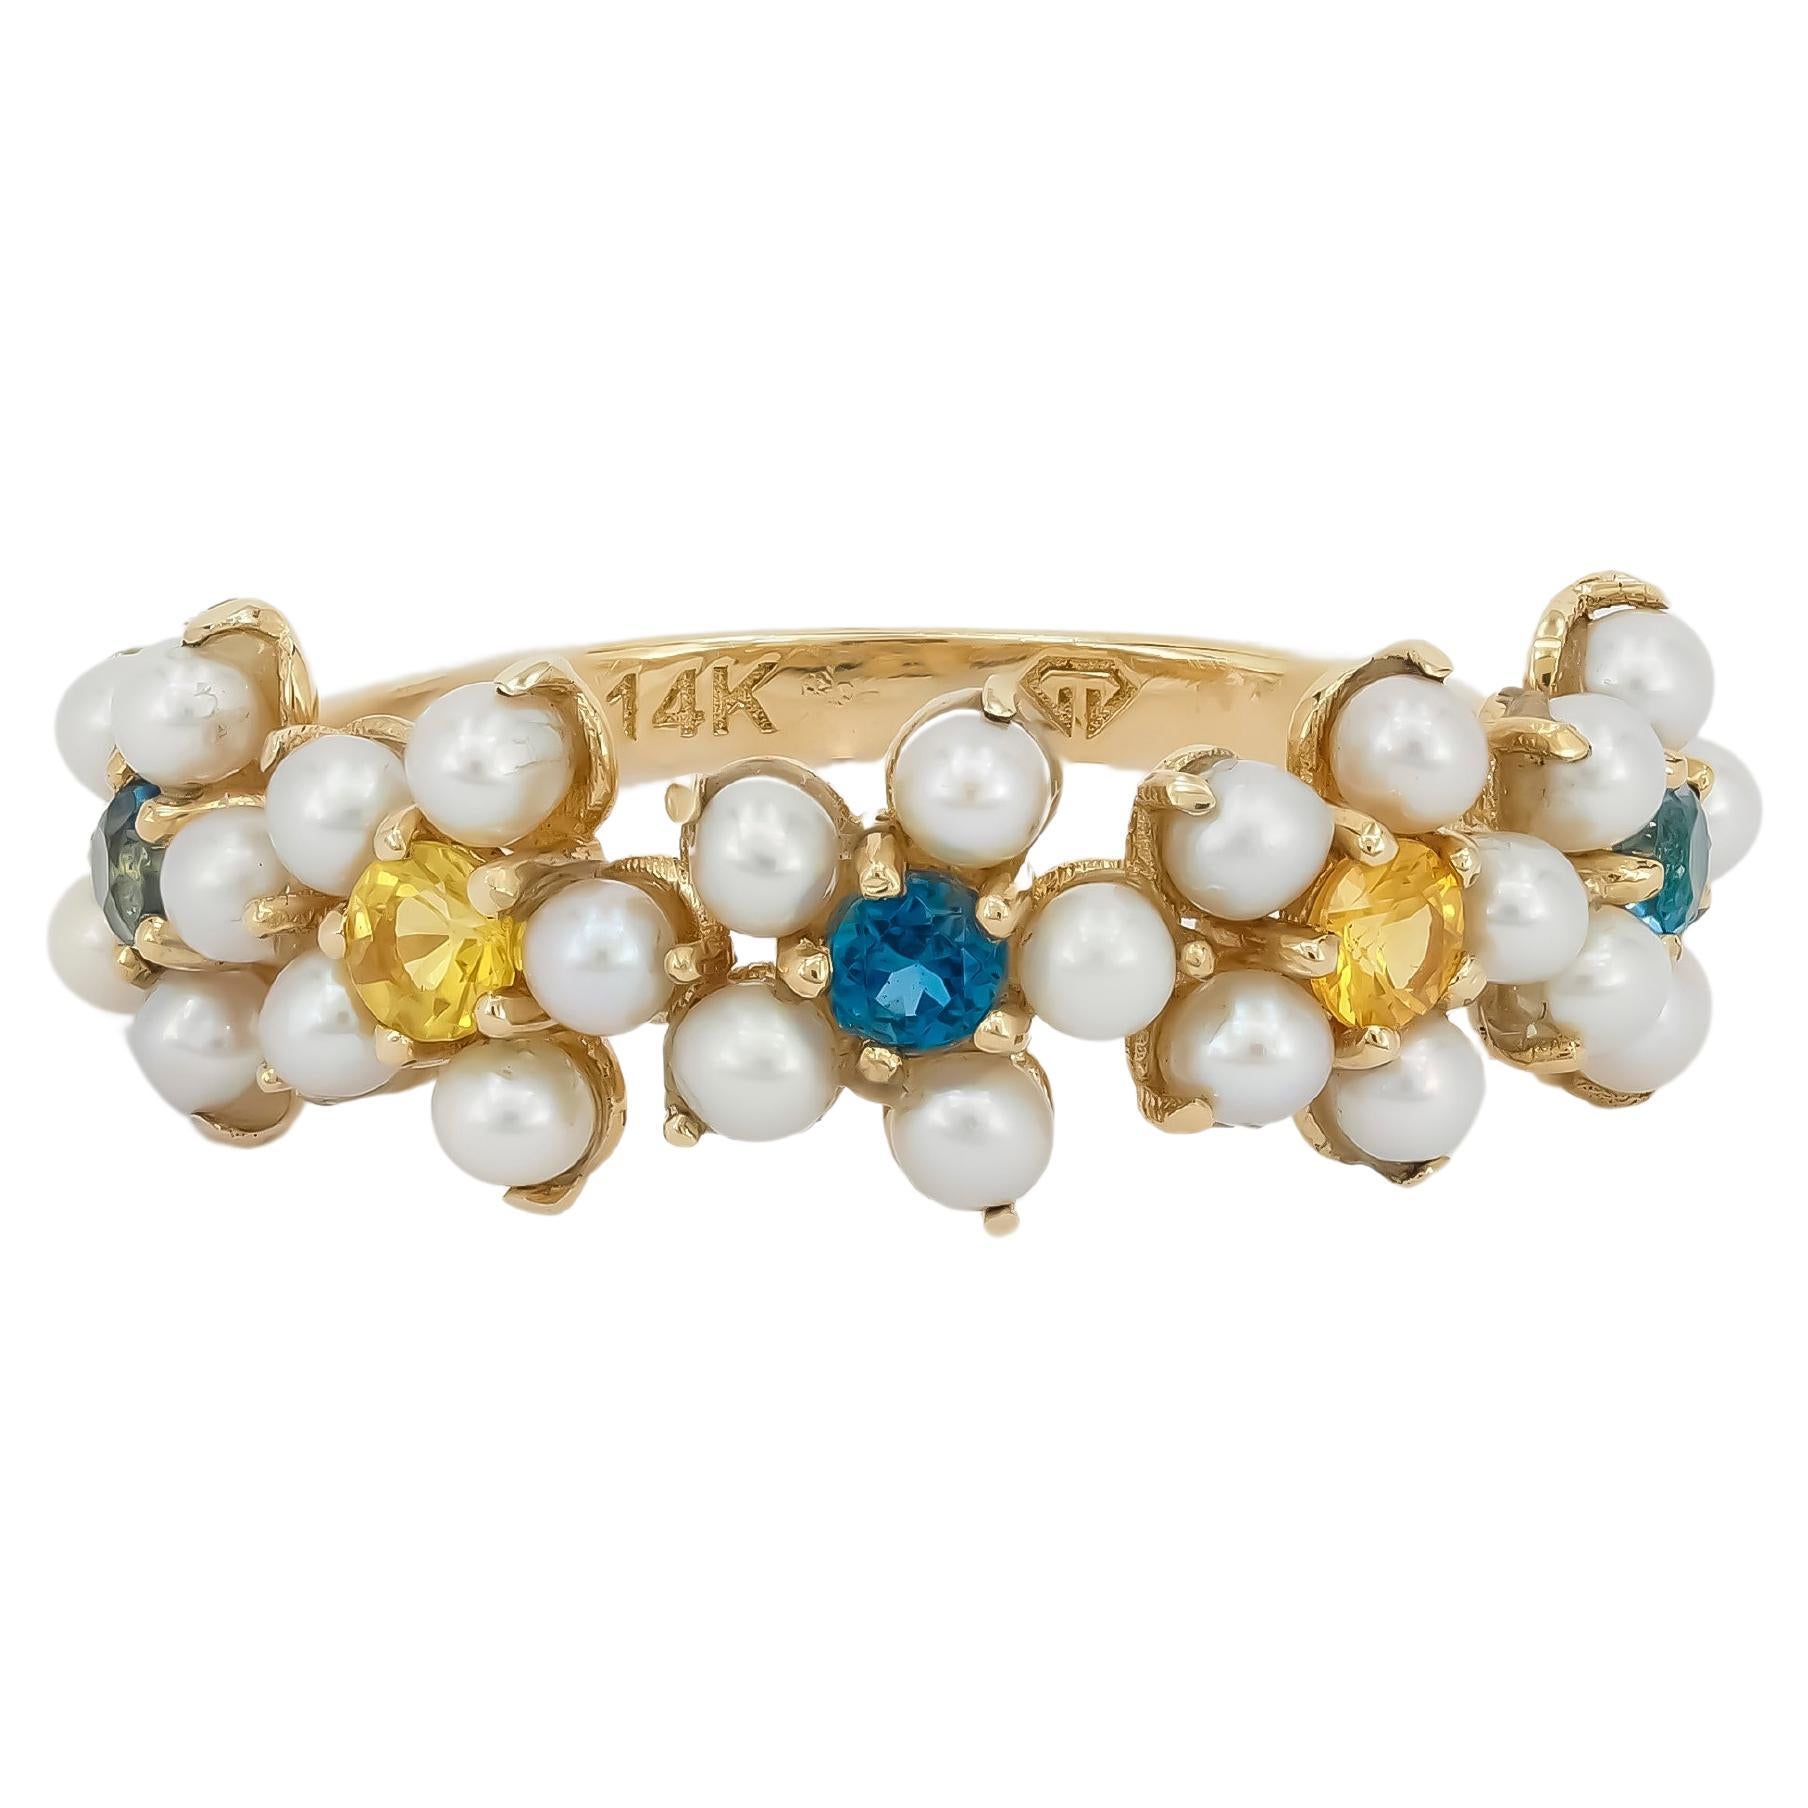 Daisy gold ring with sapphires, pearls. 